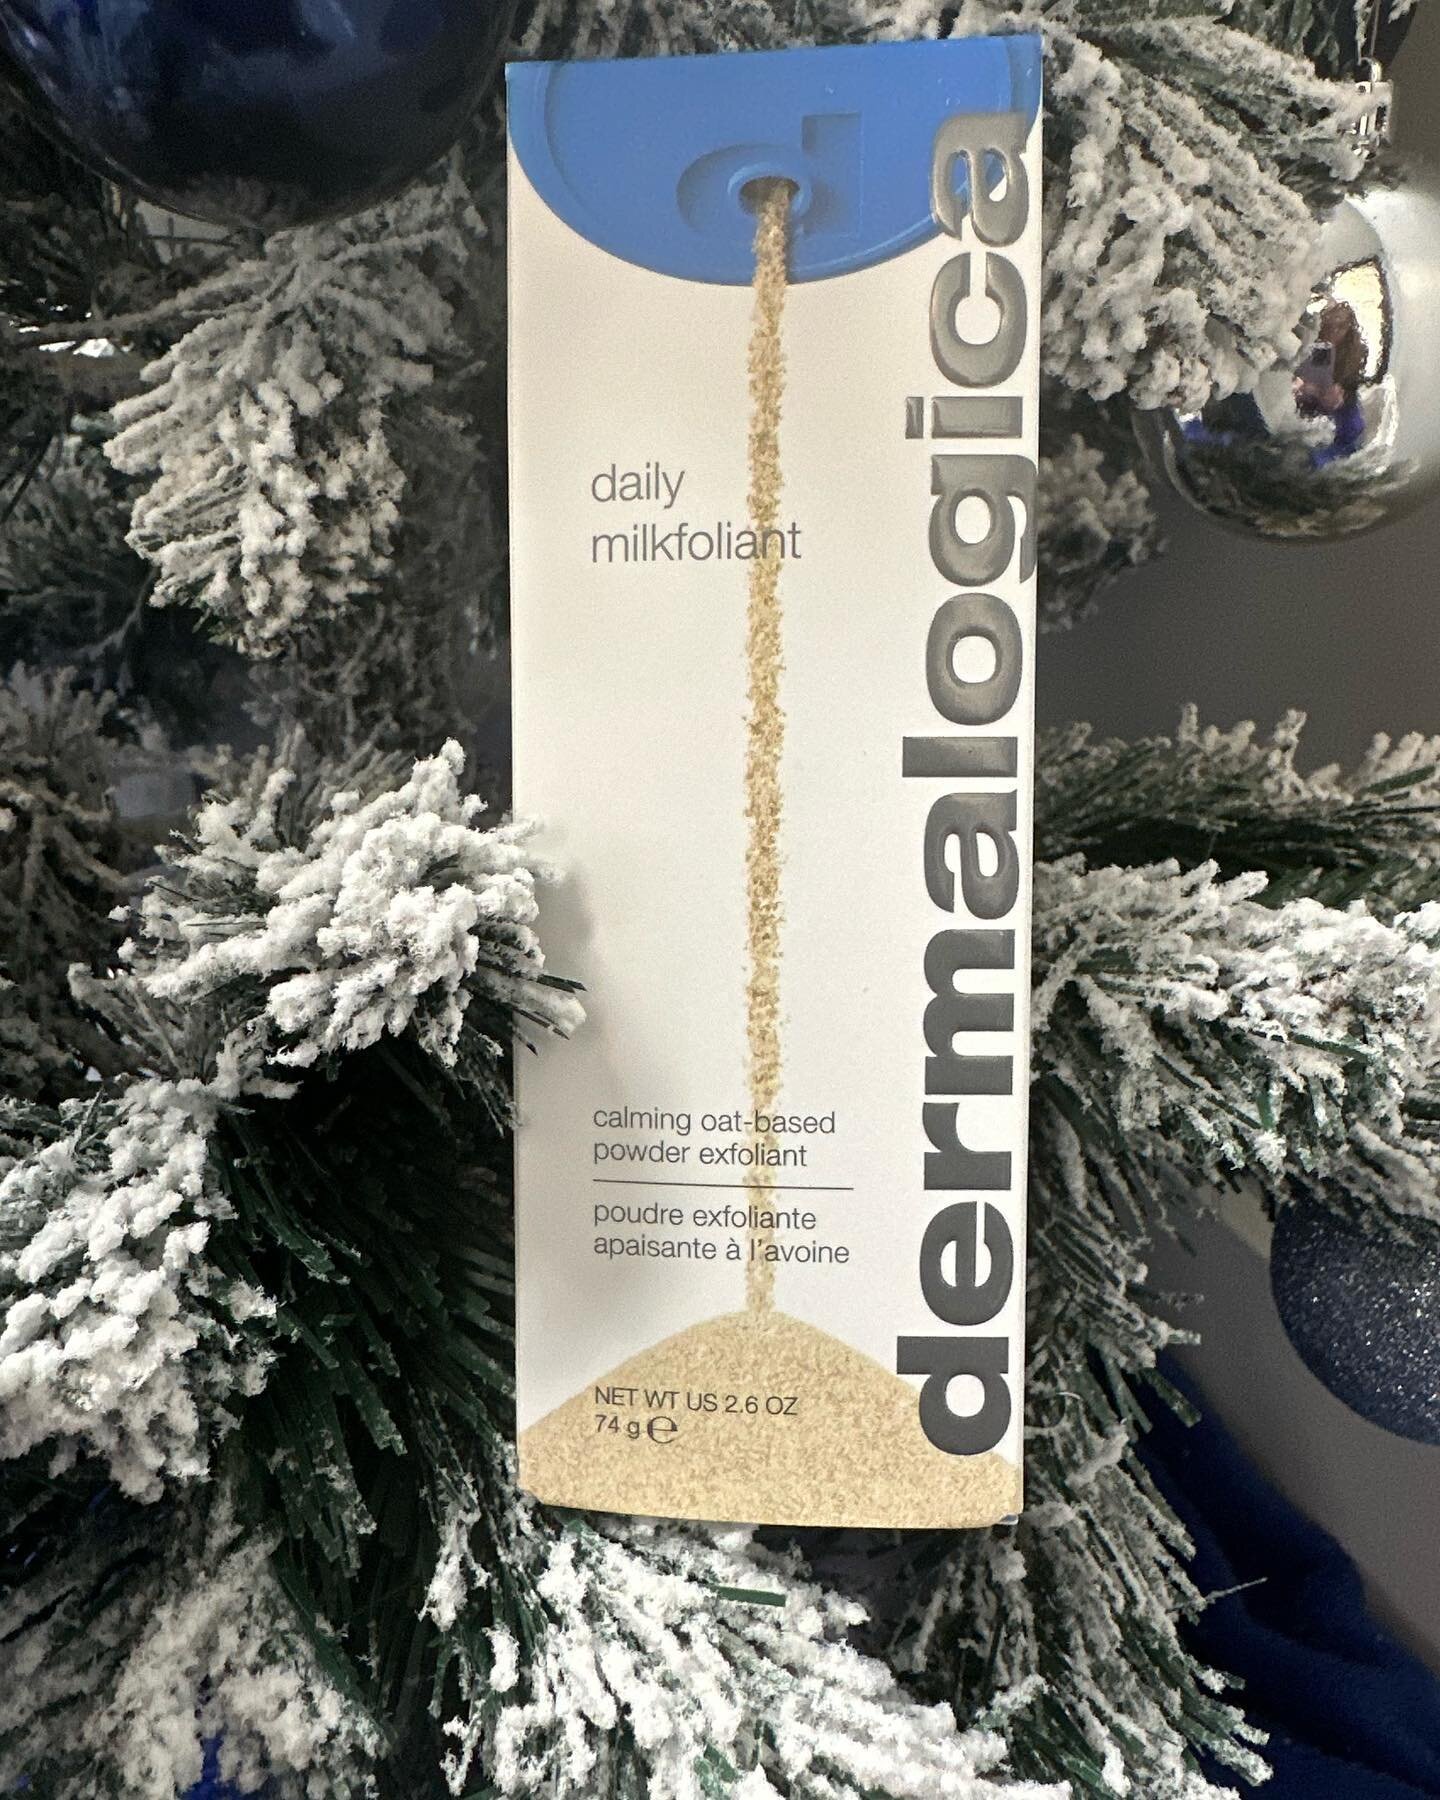 Struggling with dry skin this winter? Try MILKFOLIANT&nbsp;by Dermalogica! ❄️🤗

On occasion, we like to ask the team members at BodyRenewal what products they enjoy, and today&rsquo;s pick comes from our lovely Miss Bee! Bee struggles with very dry 